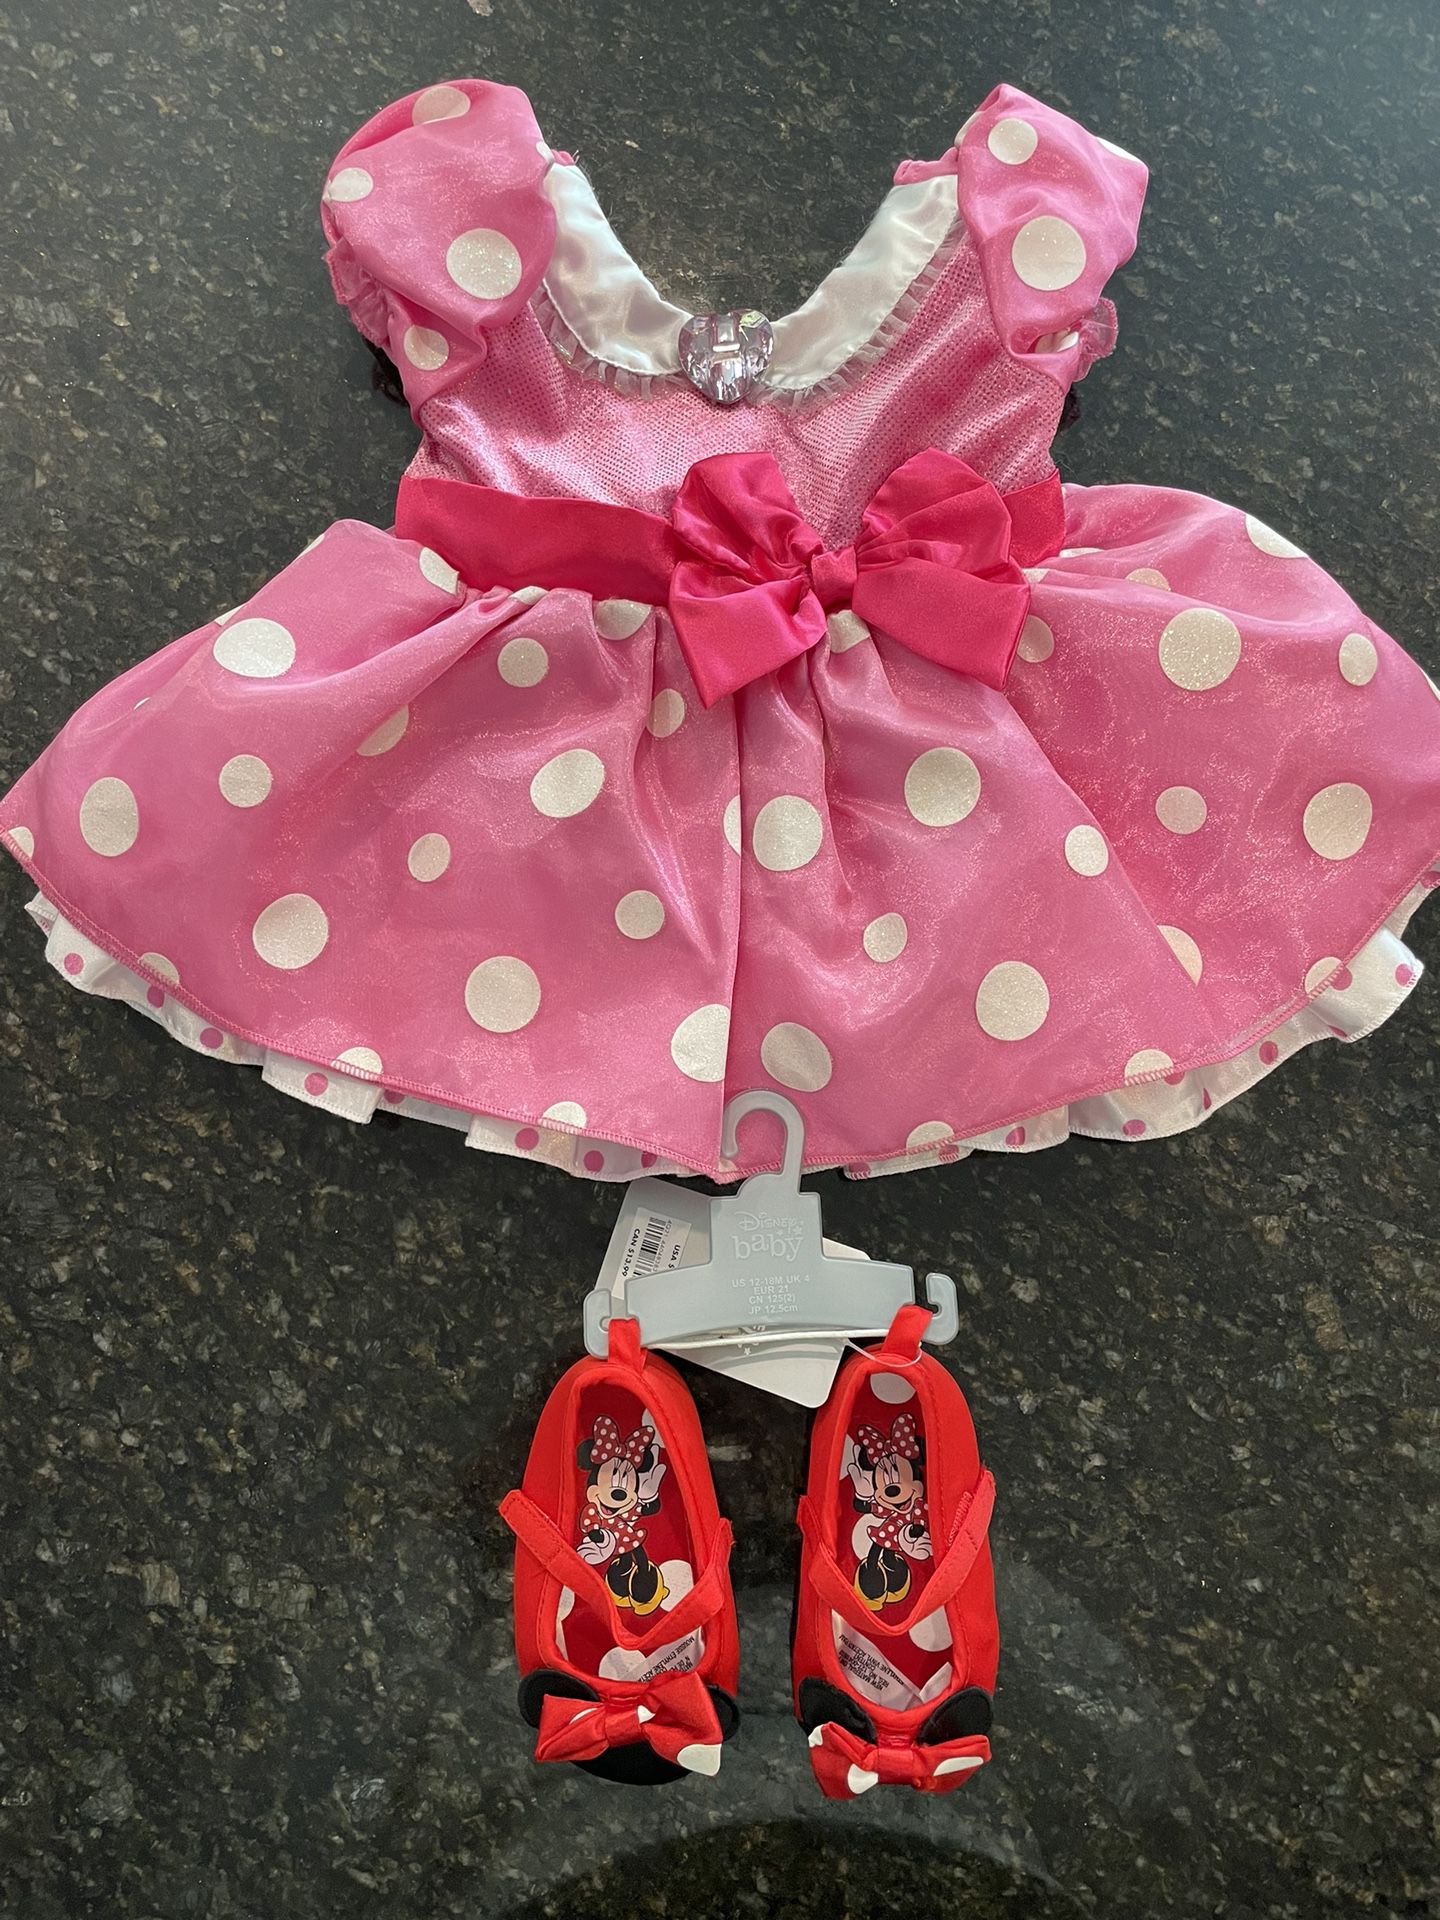 Disney Baby Girl Minnie Mouse Dress & Shoes Size 12-18 Months